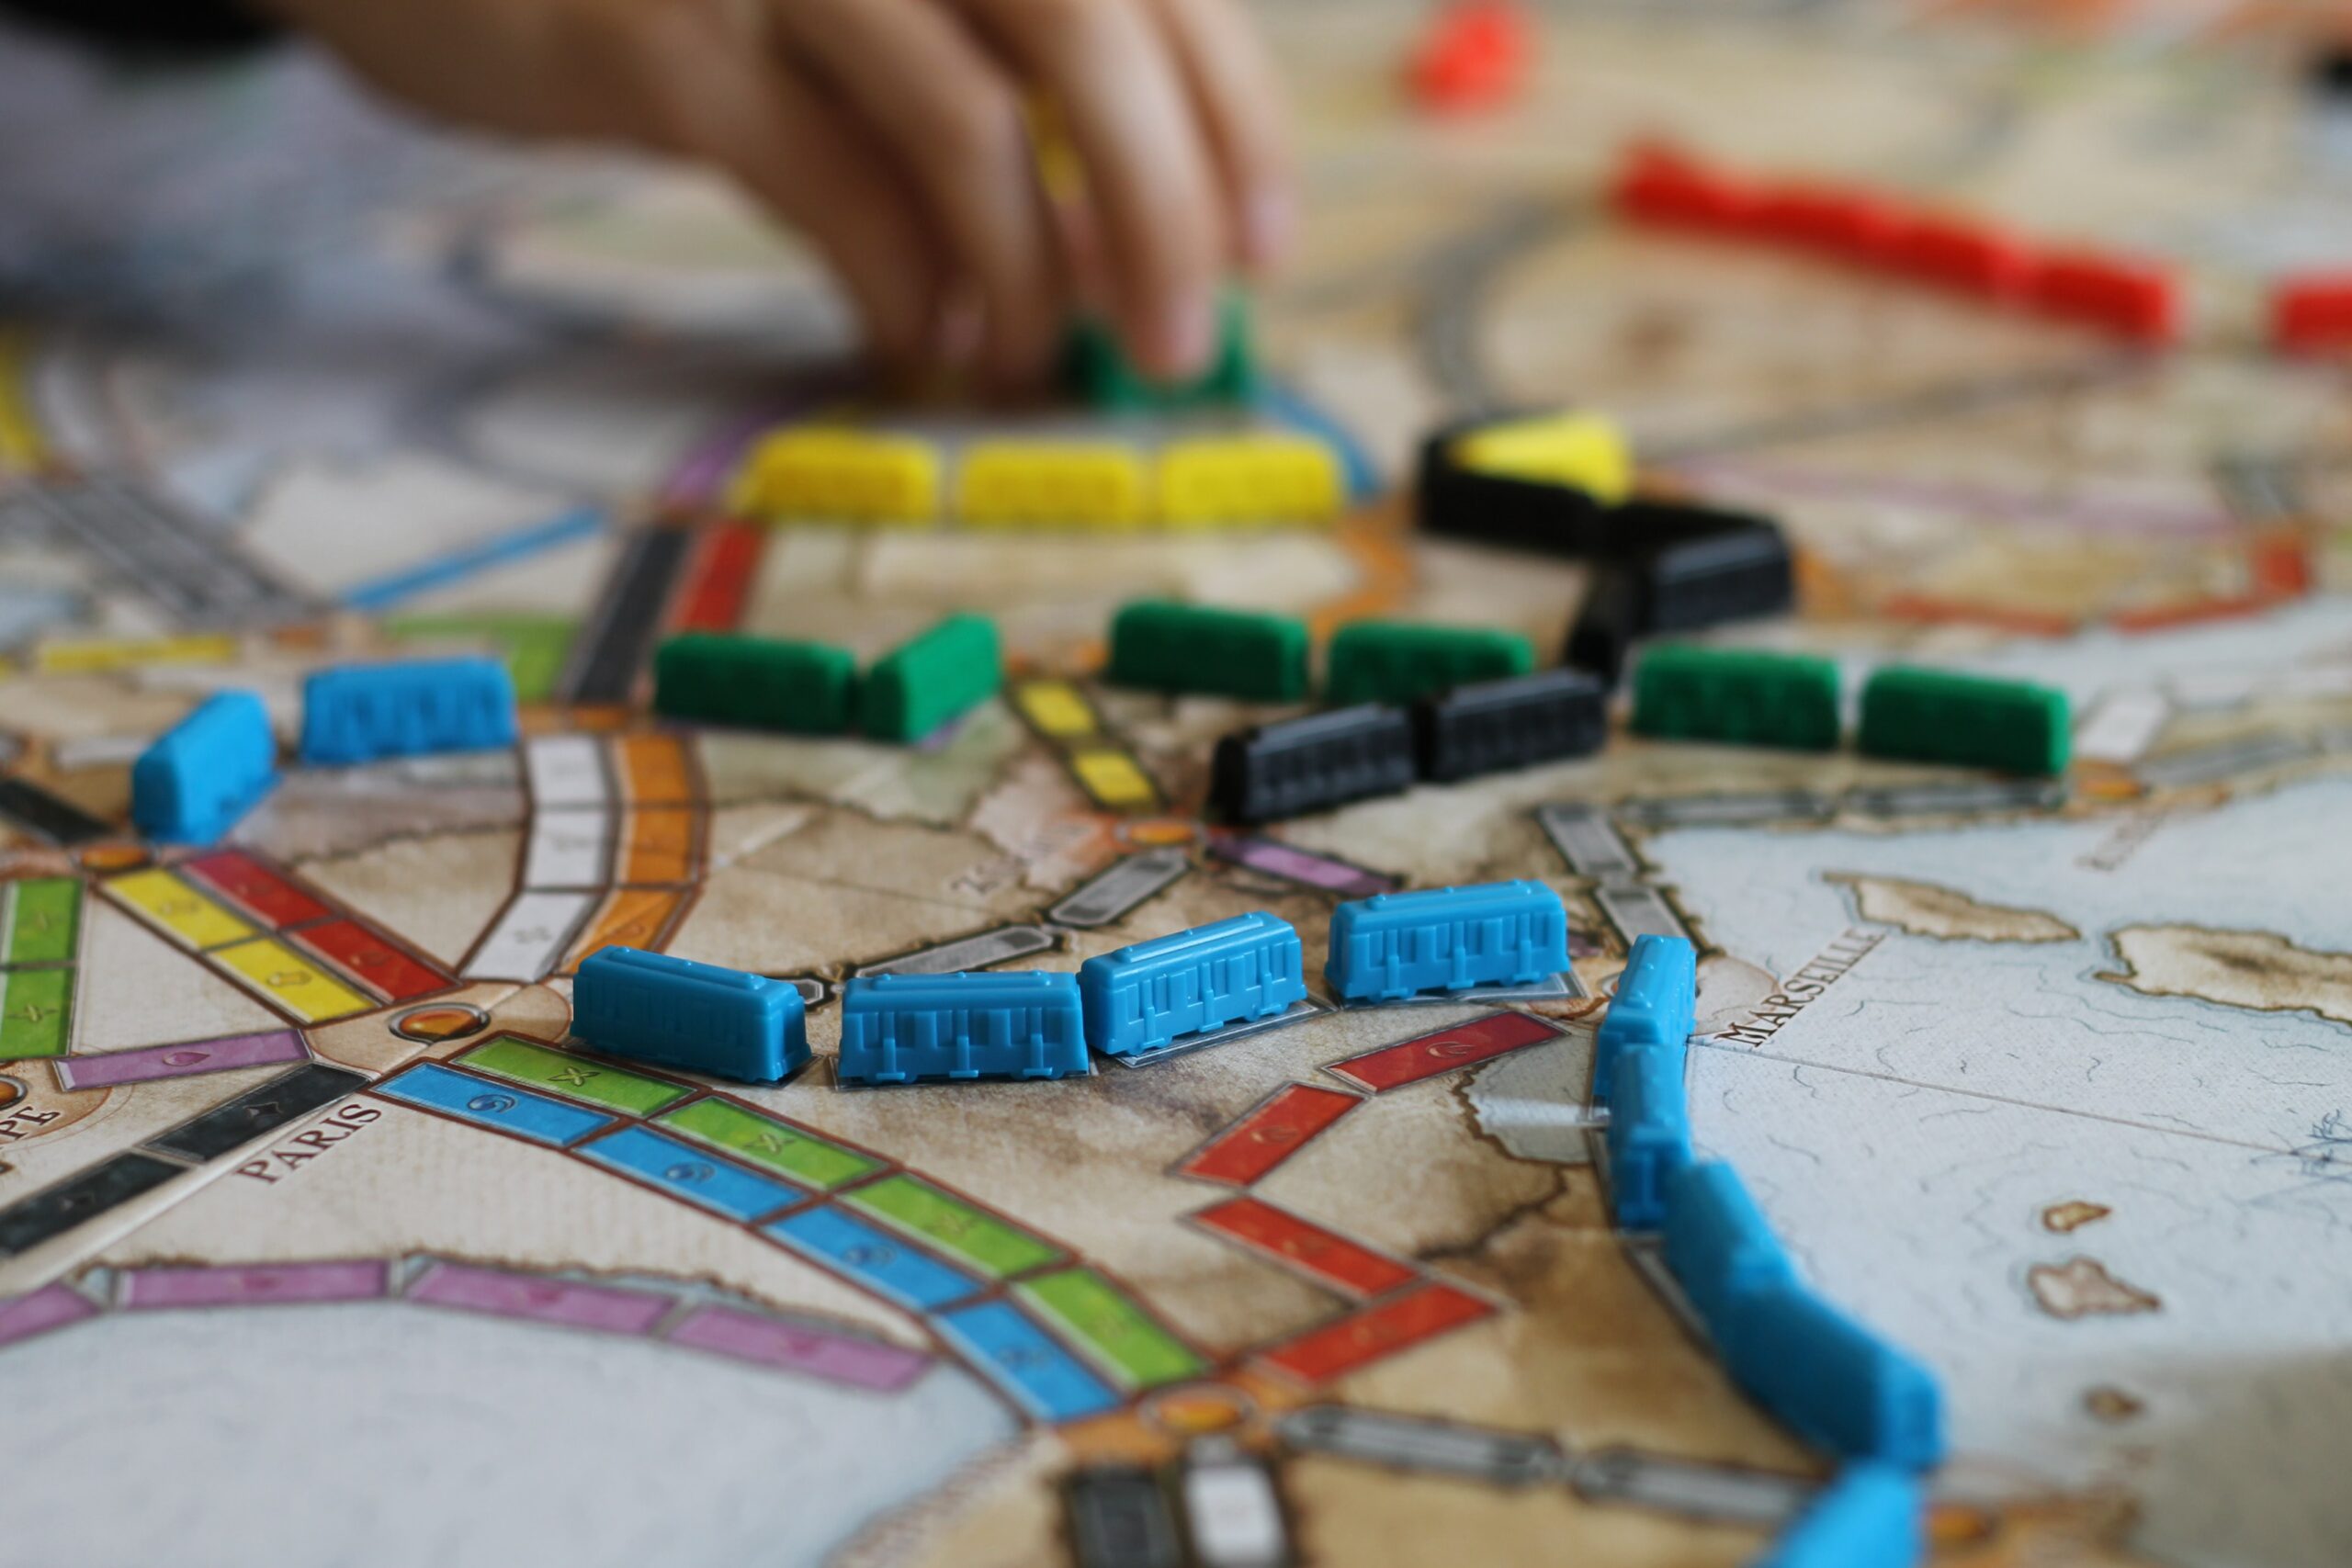 10 Fun Games to Play at Your Next Game Night